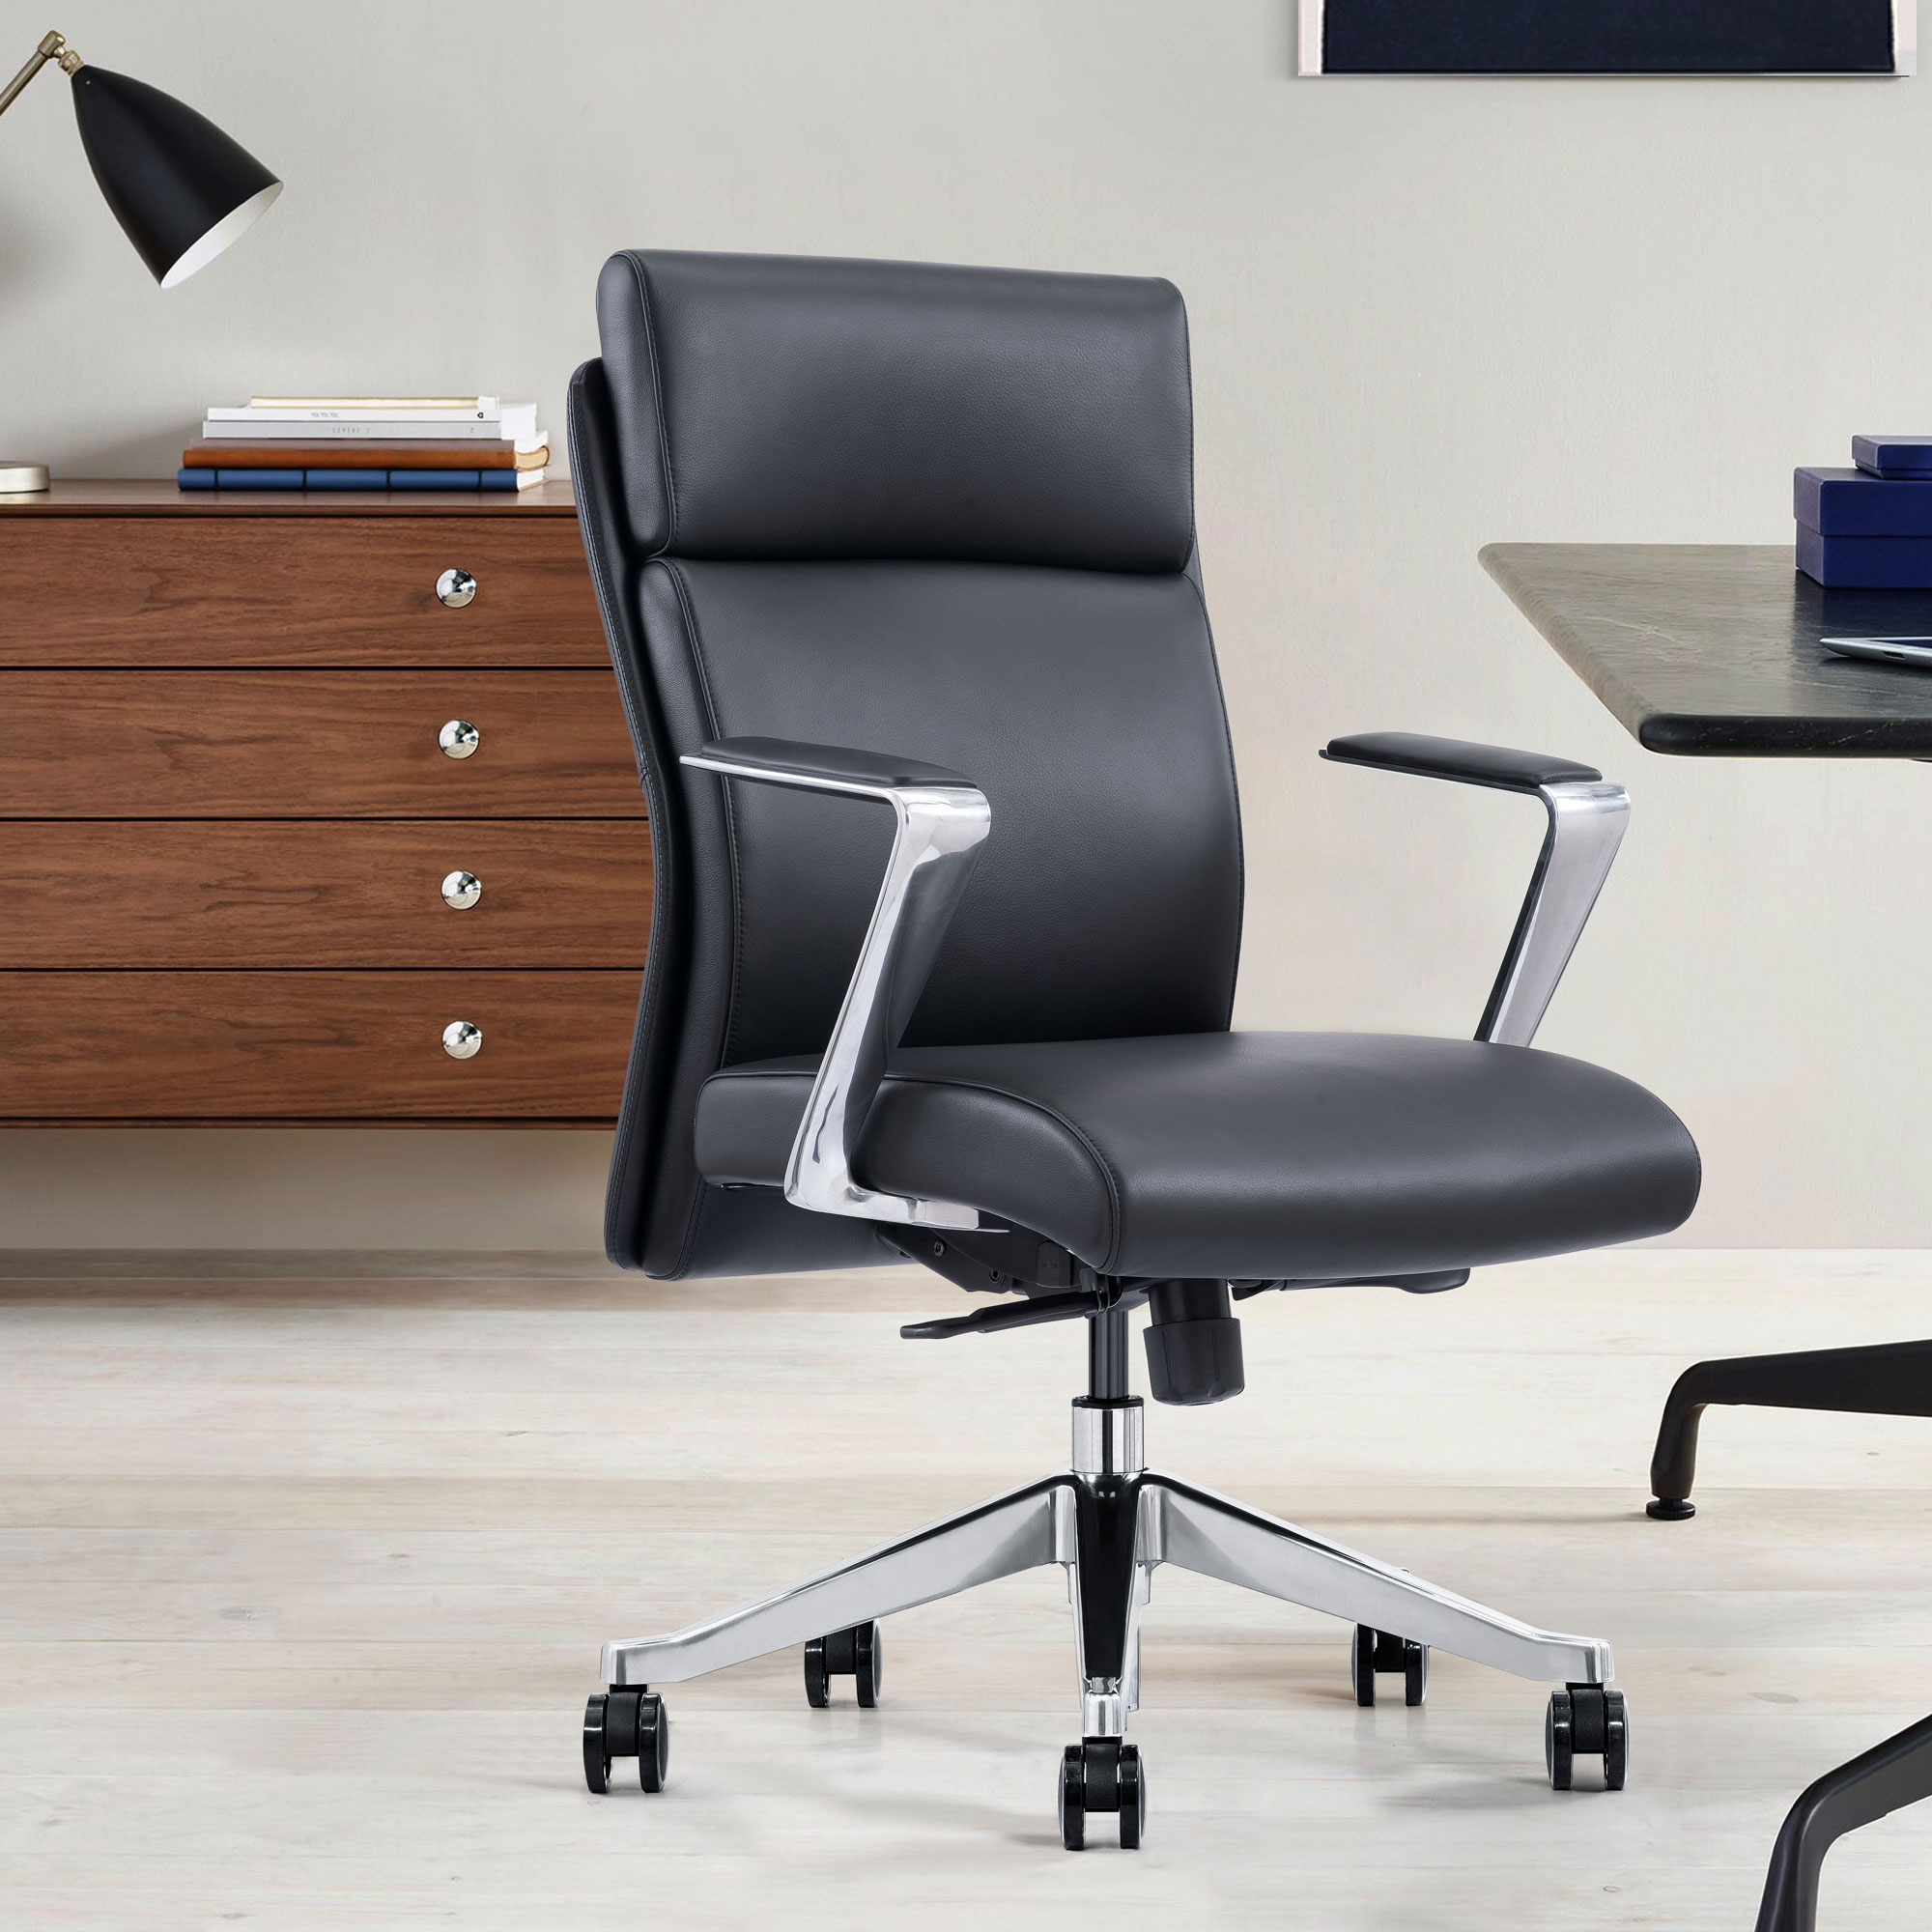 Black leather desk chair with arms and wheels